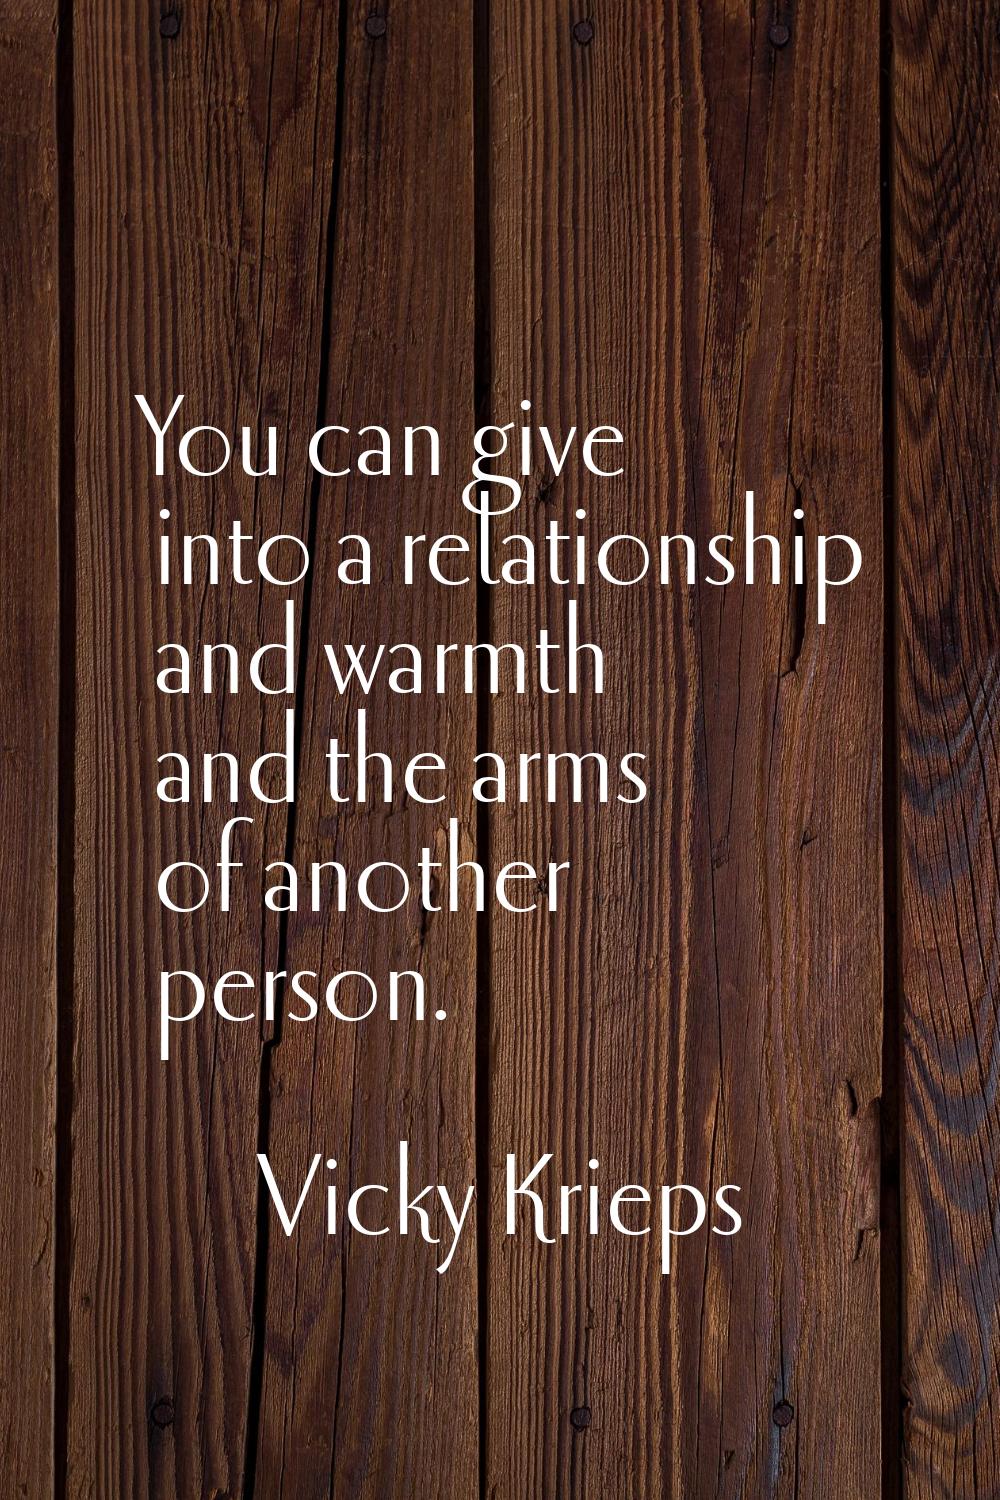 You can give into a relationship and warmth and the arms of another person.